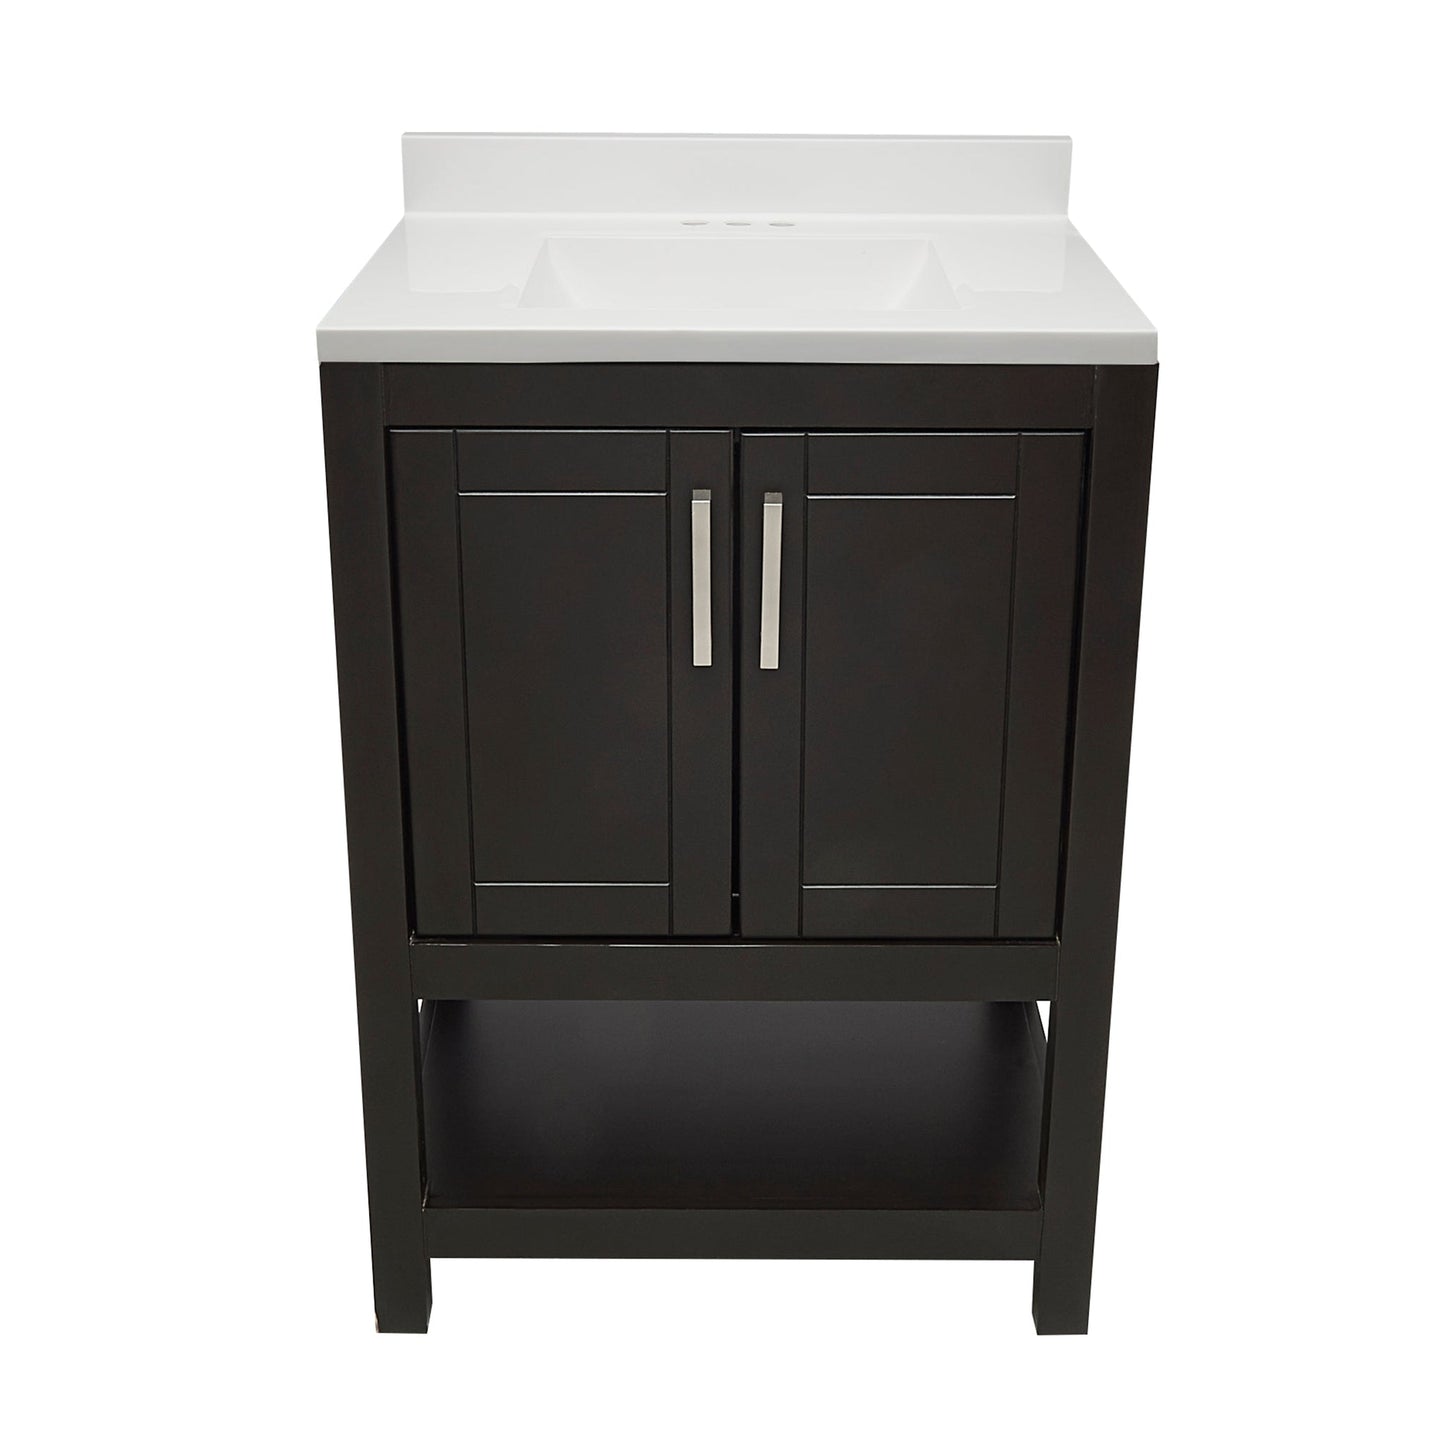 Ella's Bubbles Taos 25" Espresso Bathroom Vanity With White Cultured Marble Top With White Backsplash and Sink